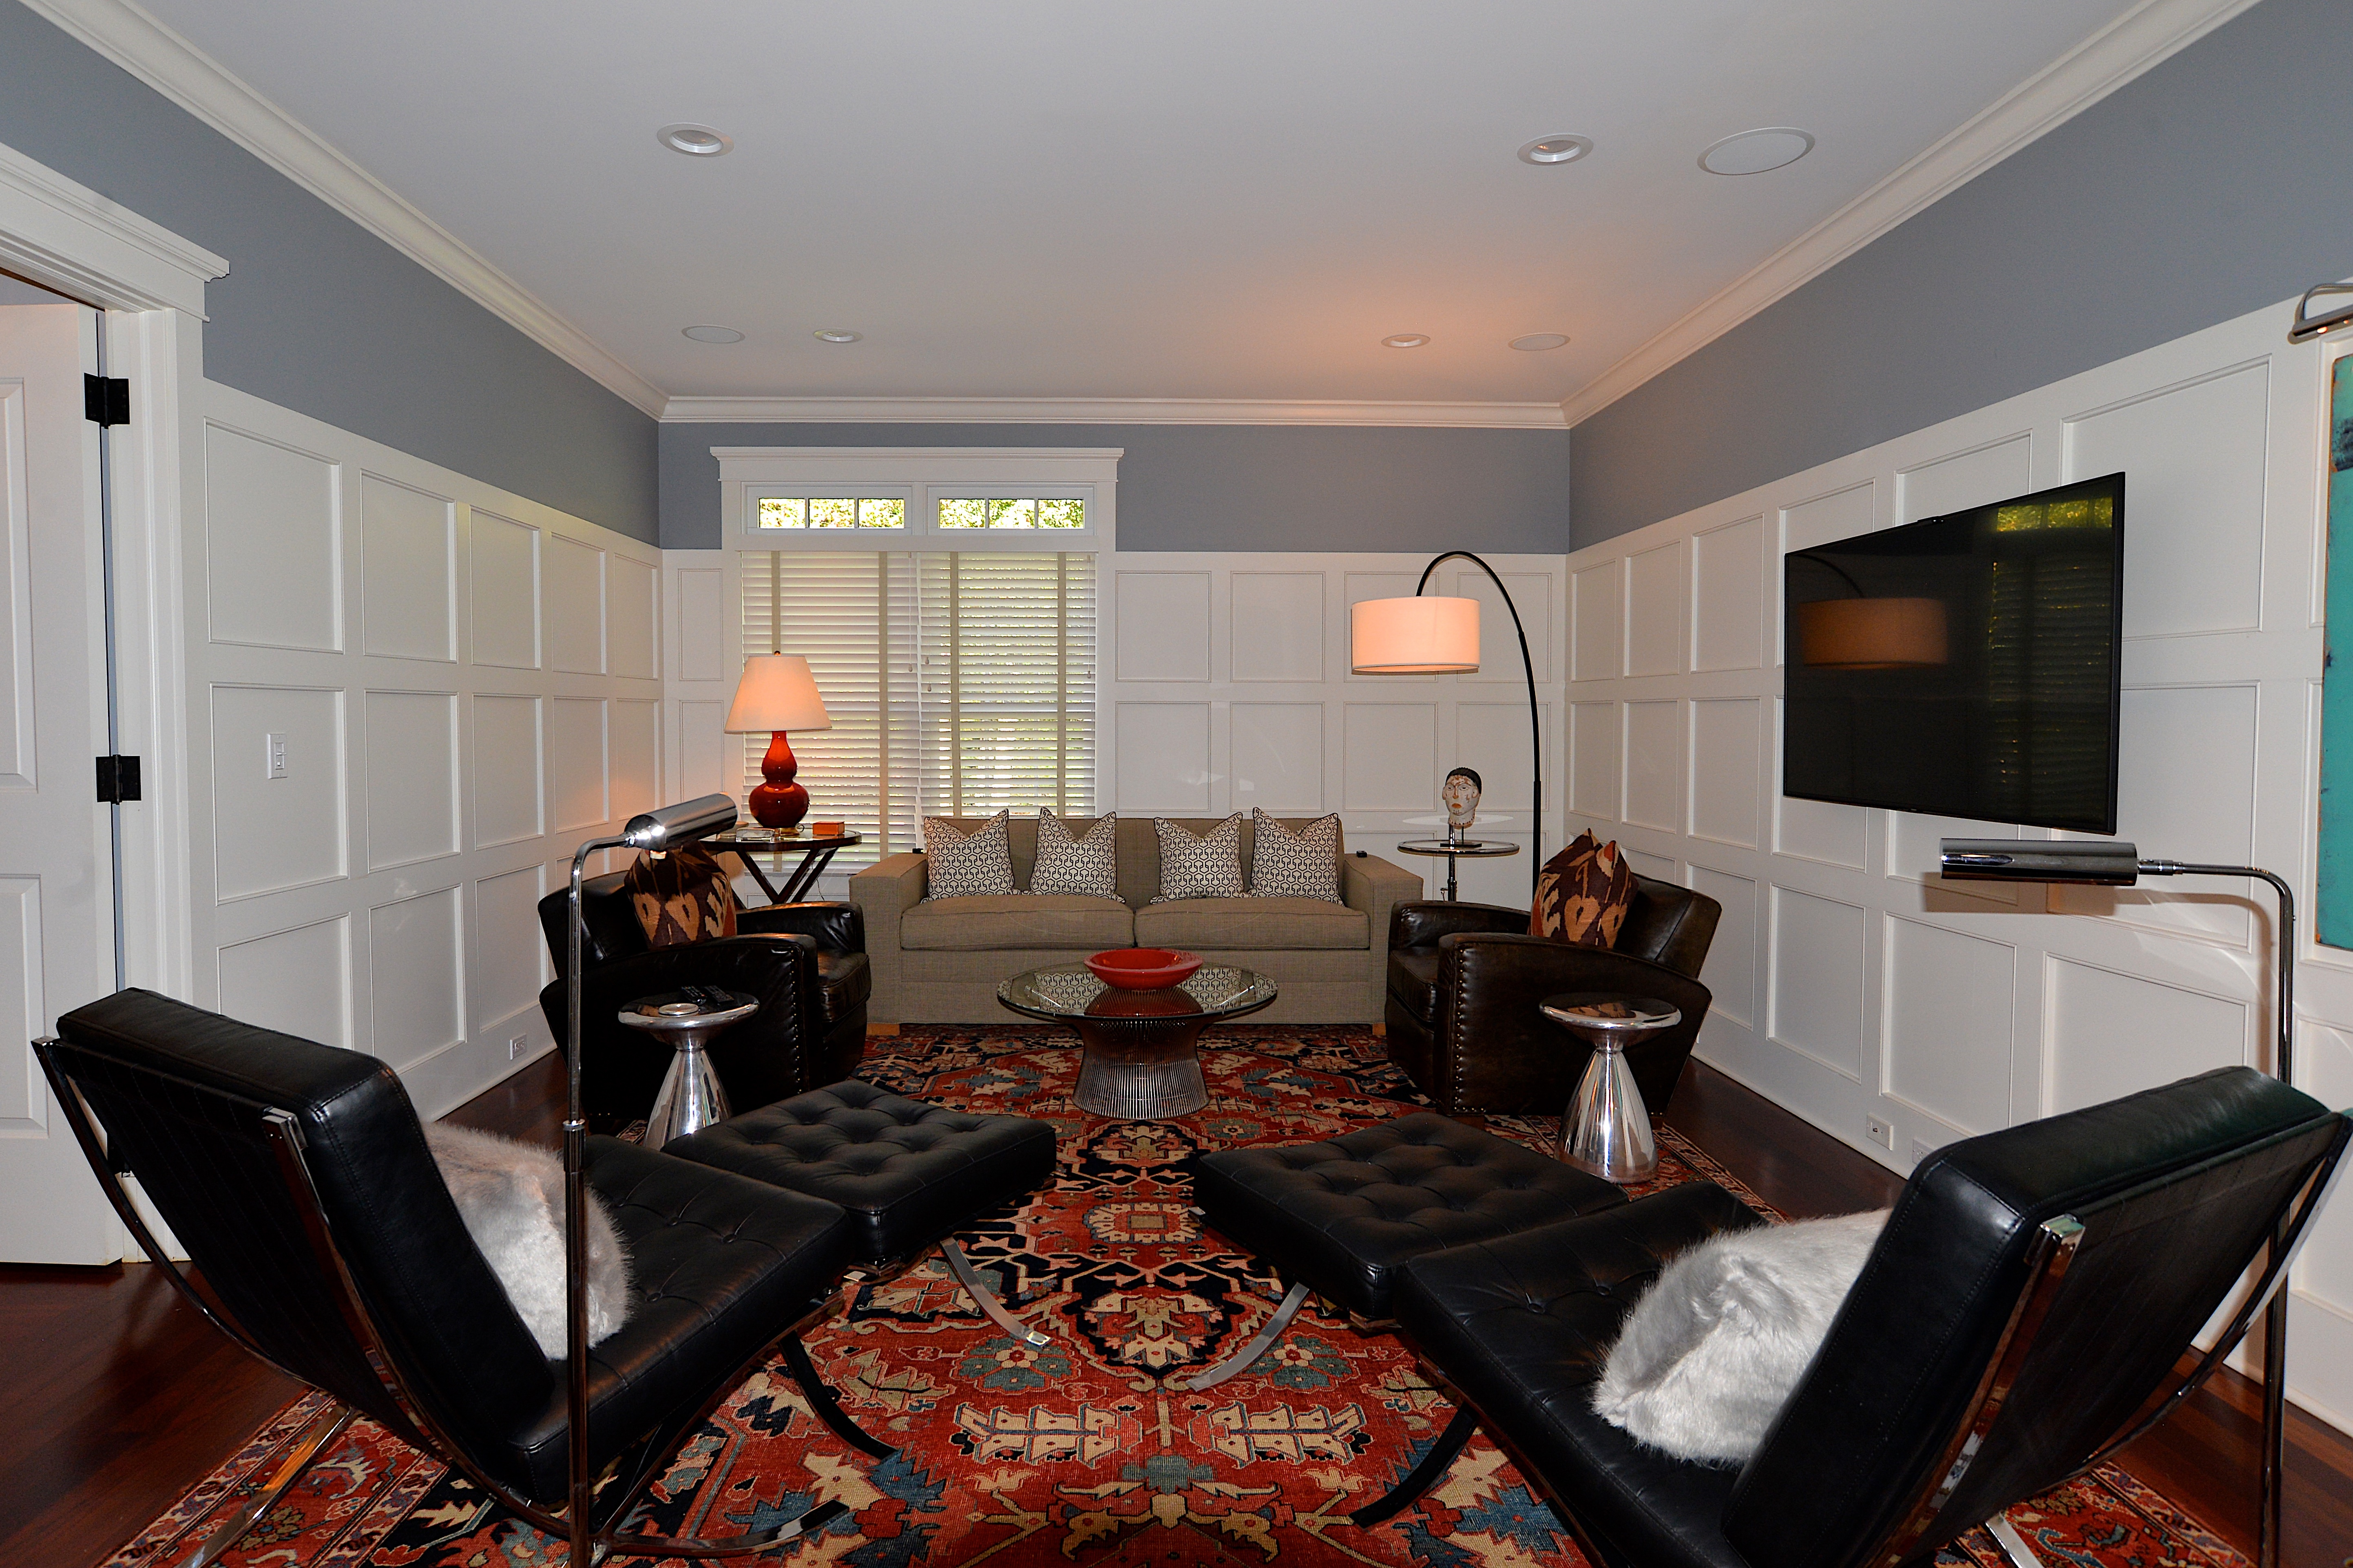 The den featured an antique Turkish rug and modern and mid-century furniture such as a Knoll table and Mies chairs.